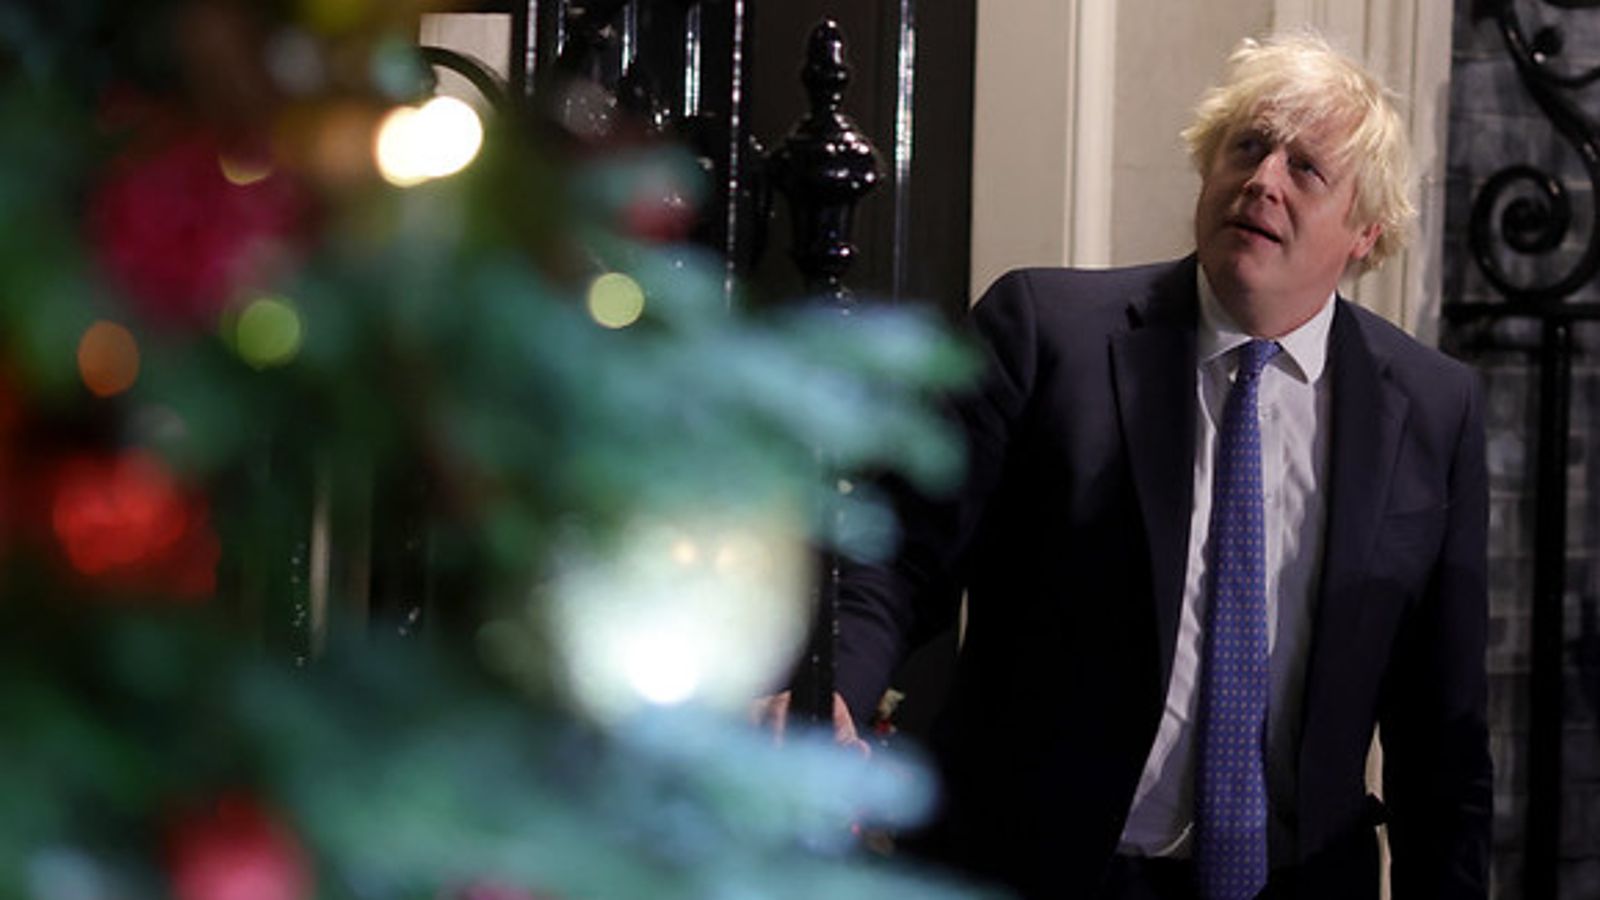 COVID-19: ‘Don’t cancel Xmas parties’ says Number 10 after ministers’ mixed messages